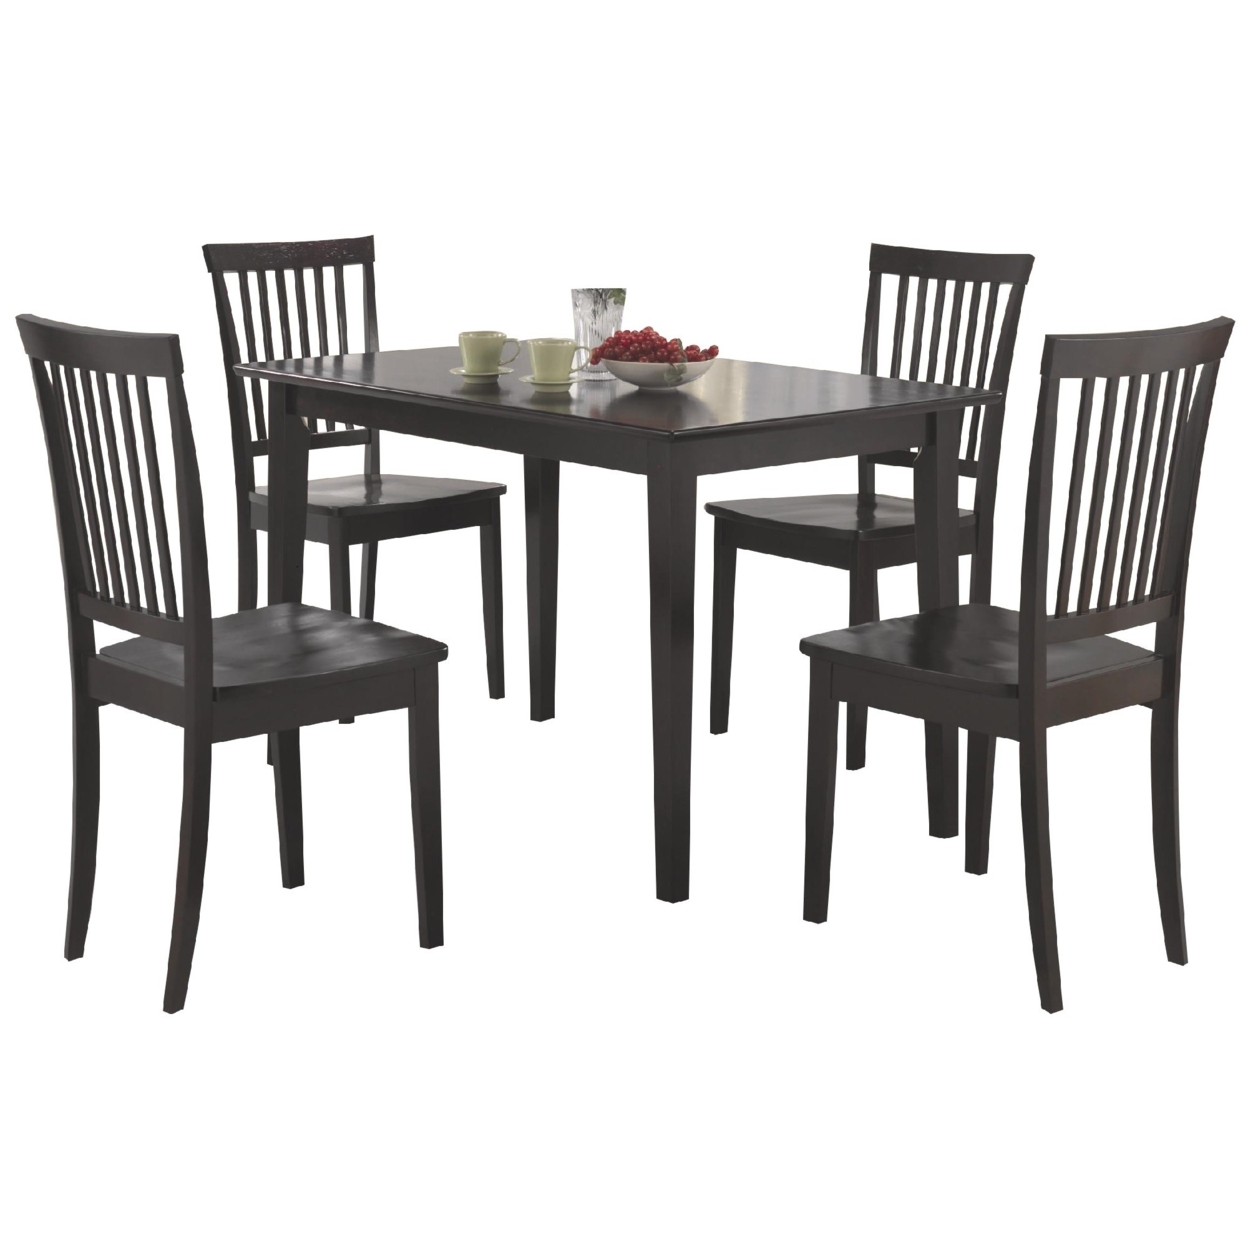 Sophisticated And Sturdy 5 Piece Wooden Dining Set, Brown- Saltoro Sherpi